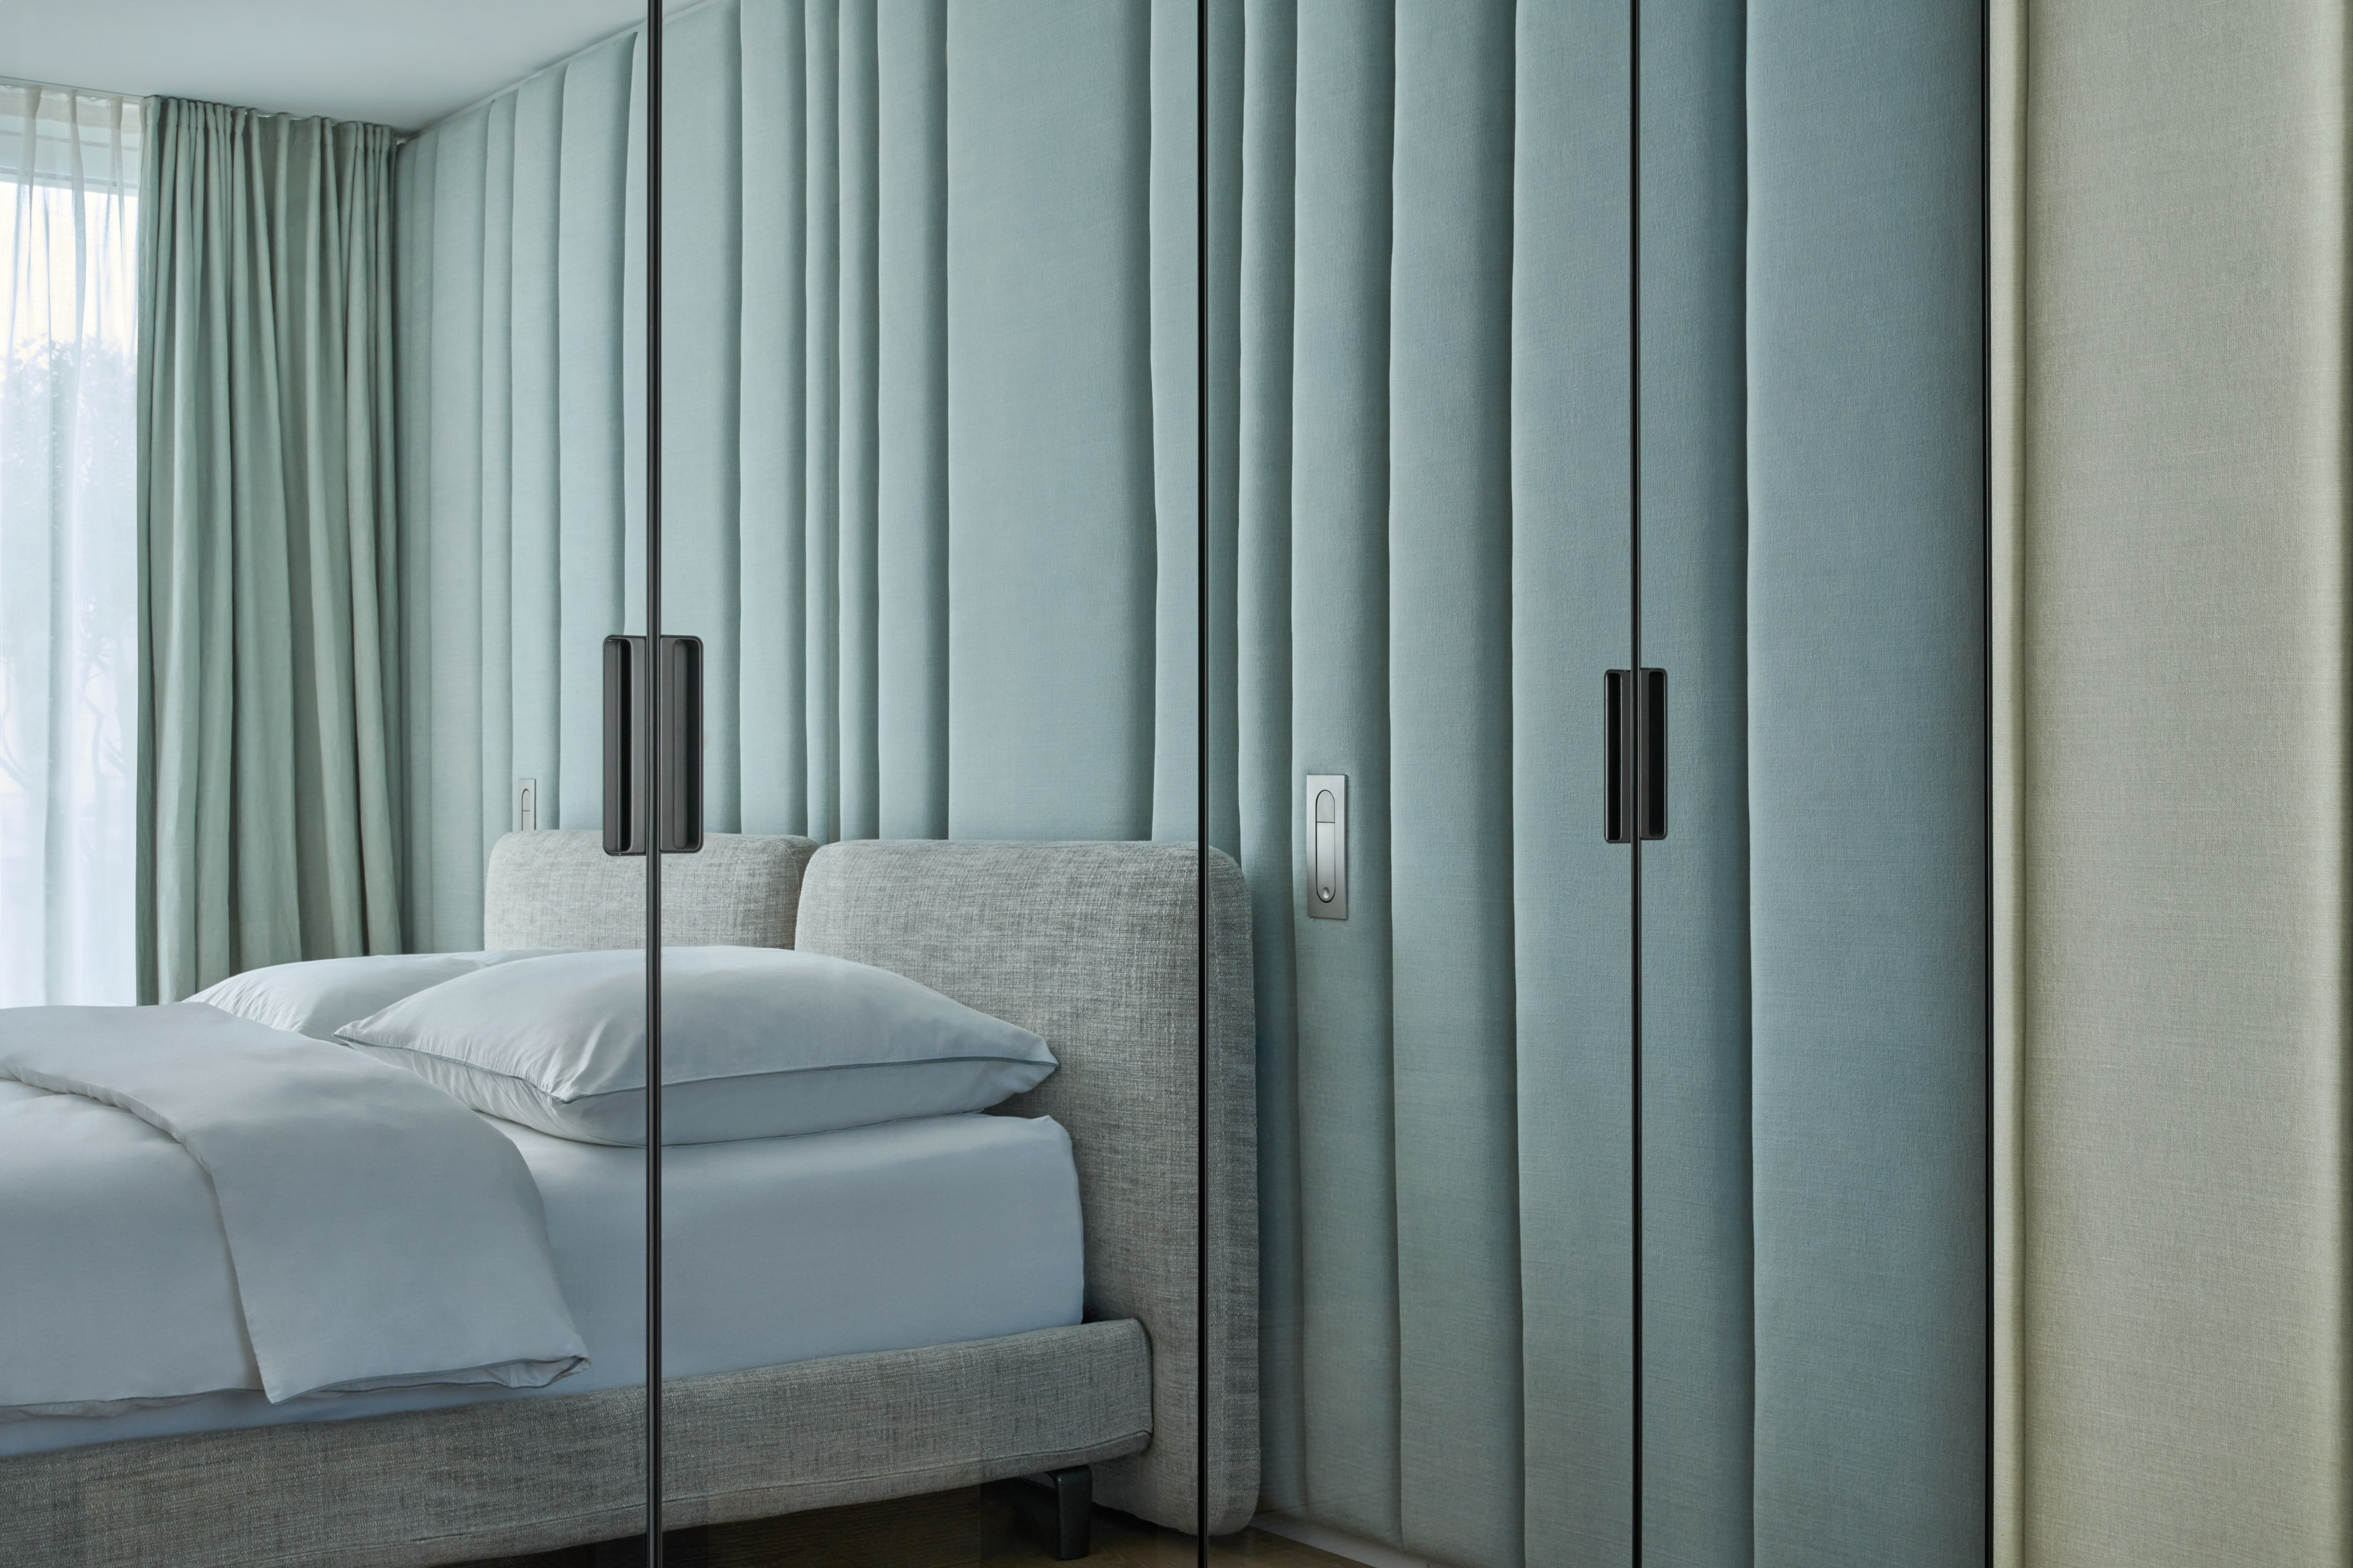 Guest Bedroom Wall covering turquoise aqua mint Minotti soft pad bed